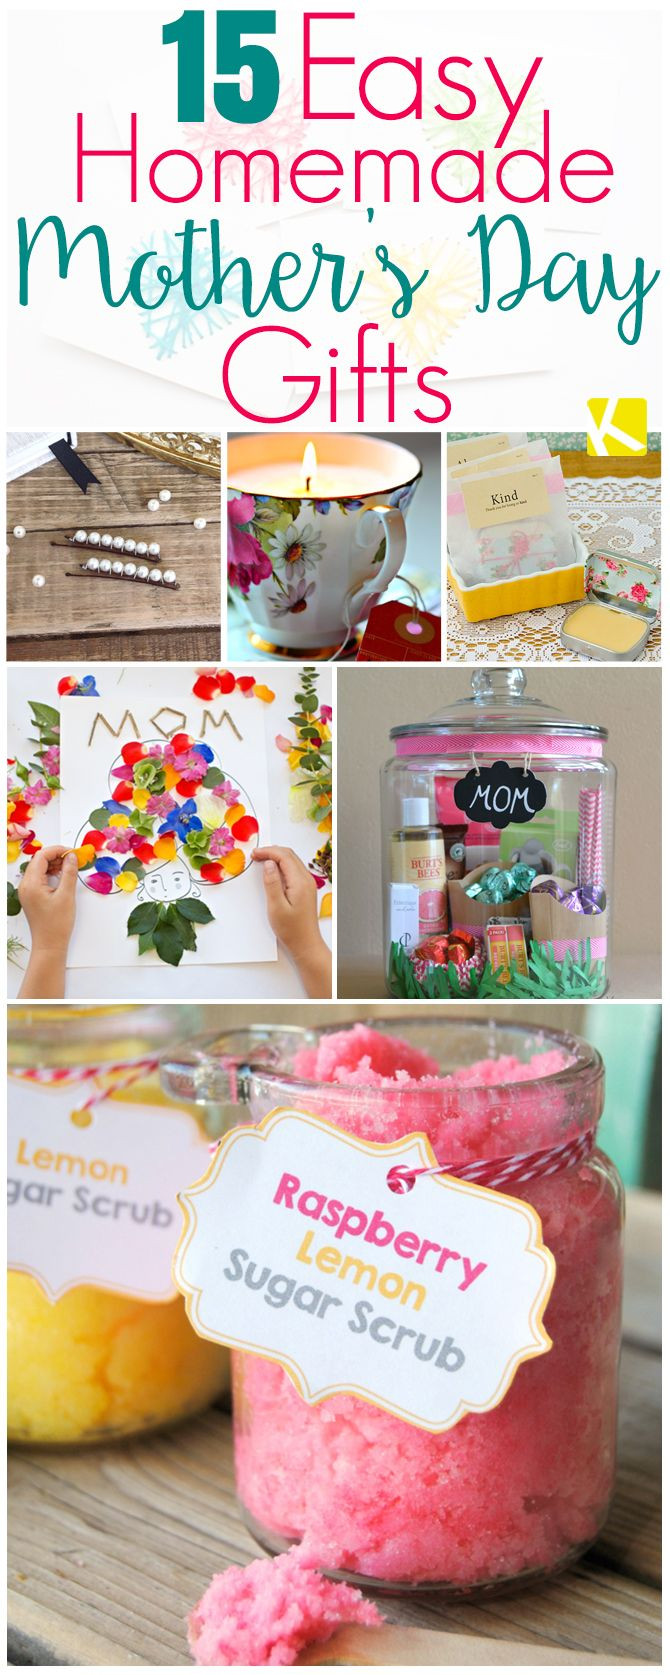 Easy Mother'S Day Gift Ideas
 15 Mother’s Day Gifts That Are Ridiculously Easy to Make